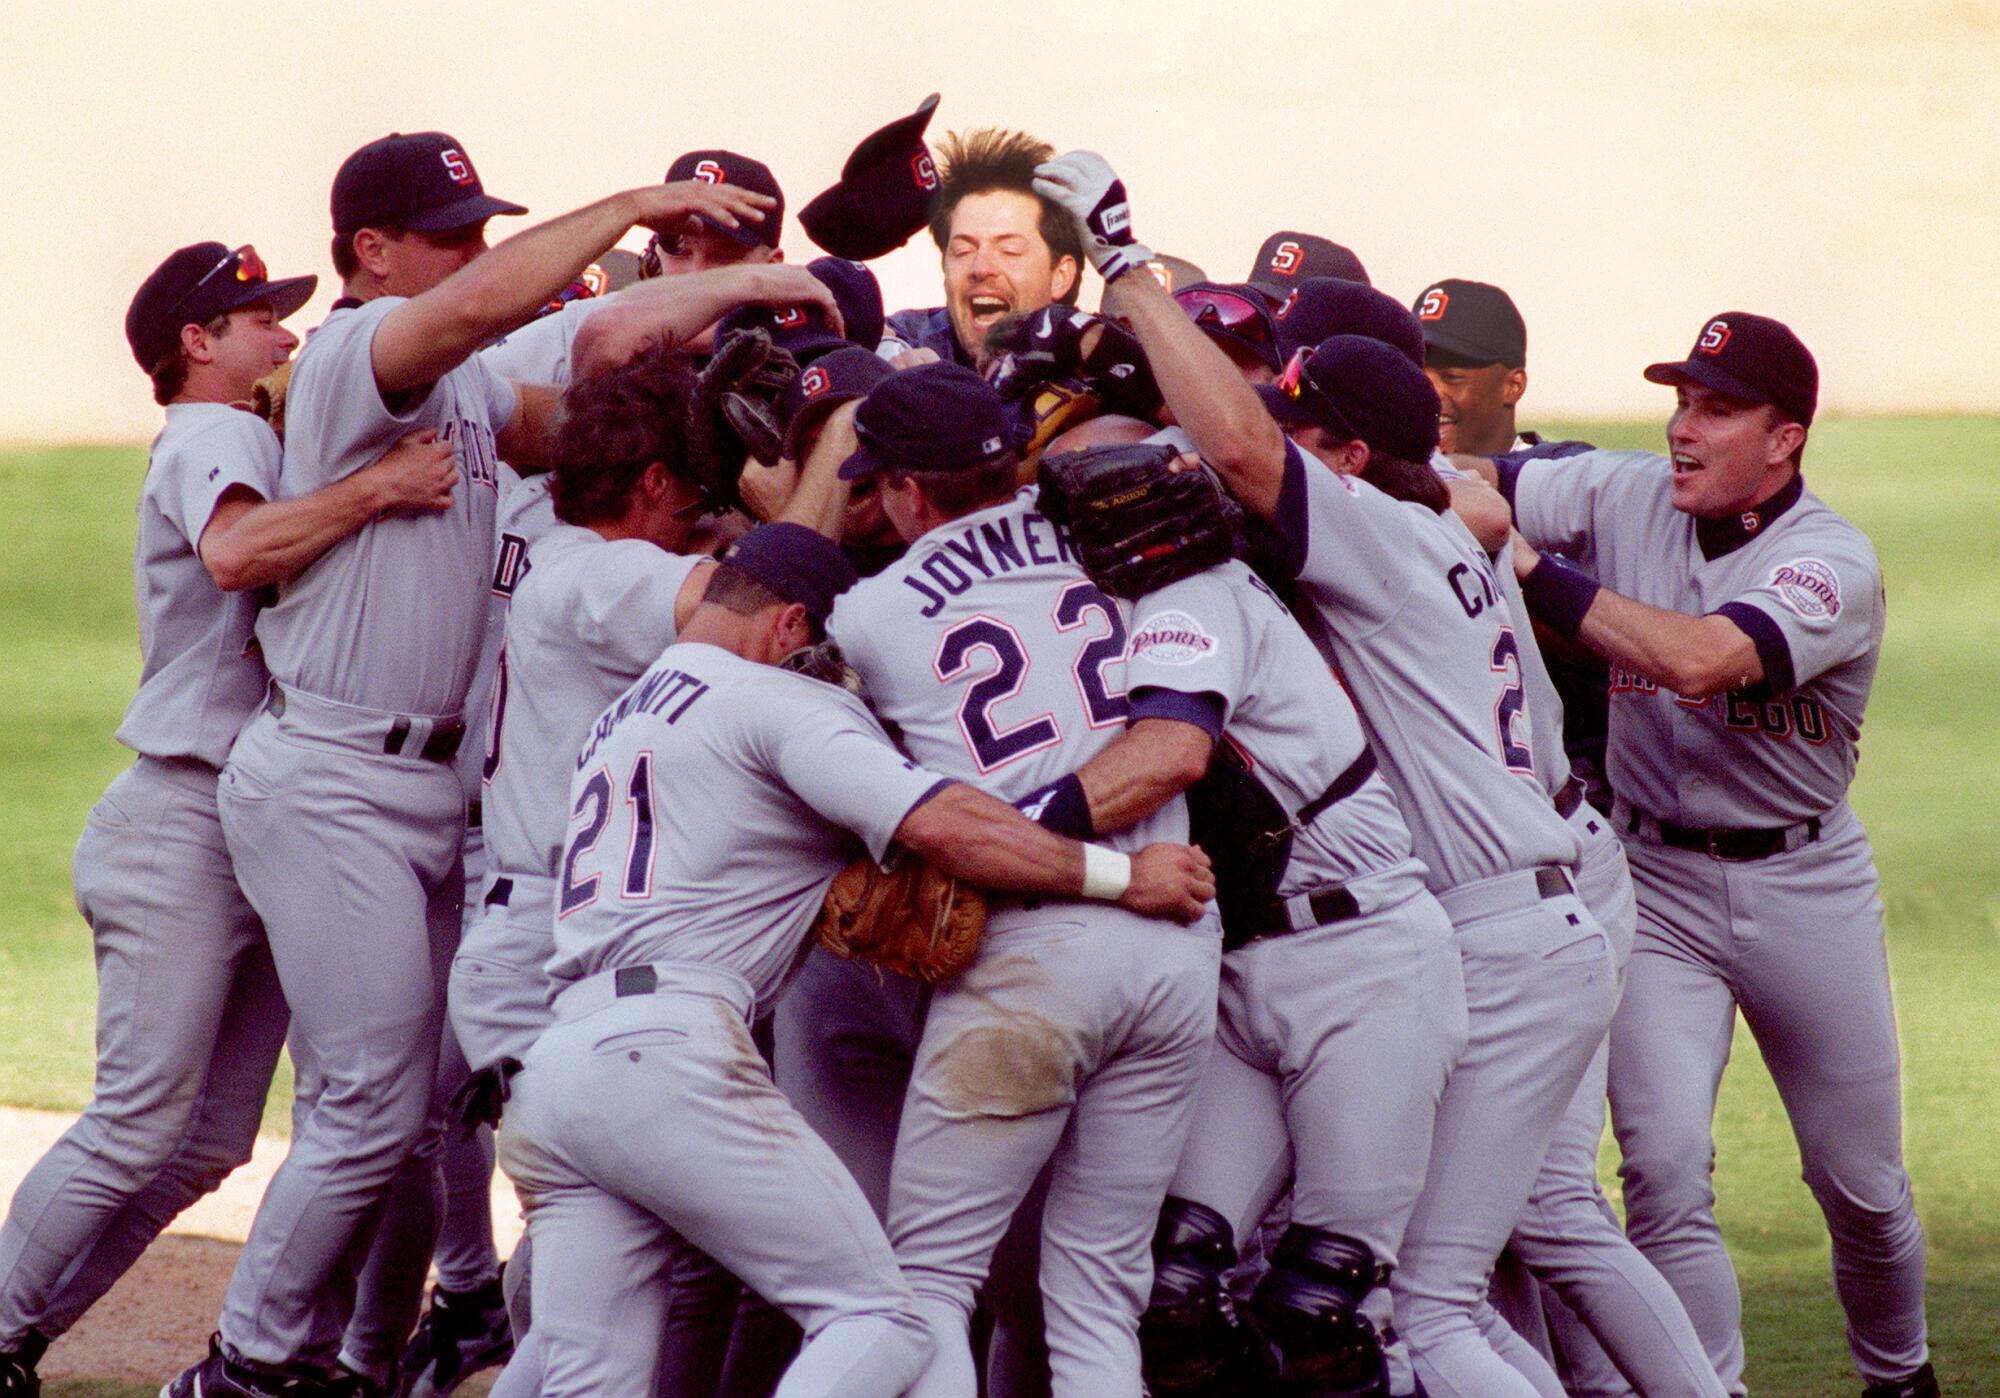 San Diego pitcher Bob Tewksbury, top center, celebrates after the Padres defeated the Dodgers.